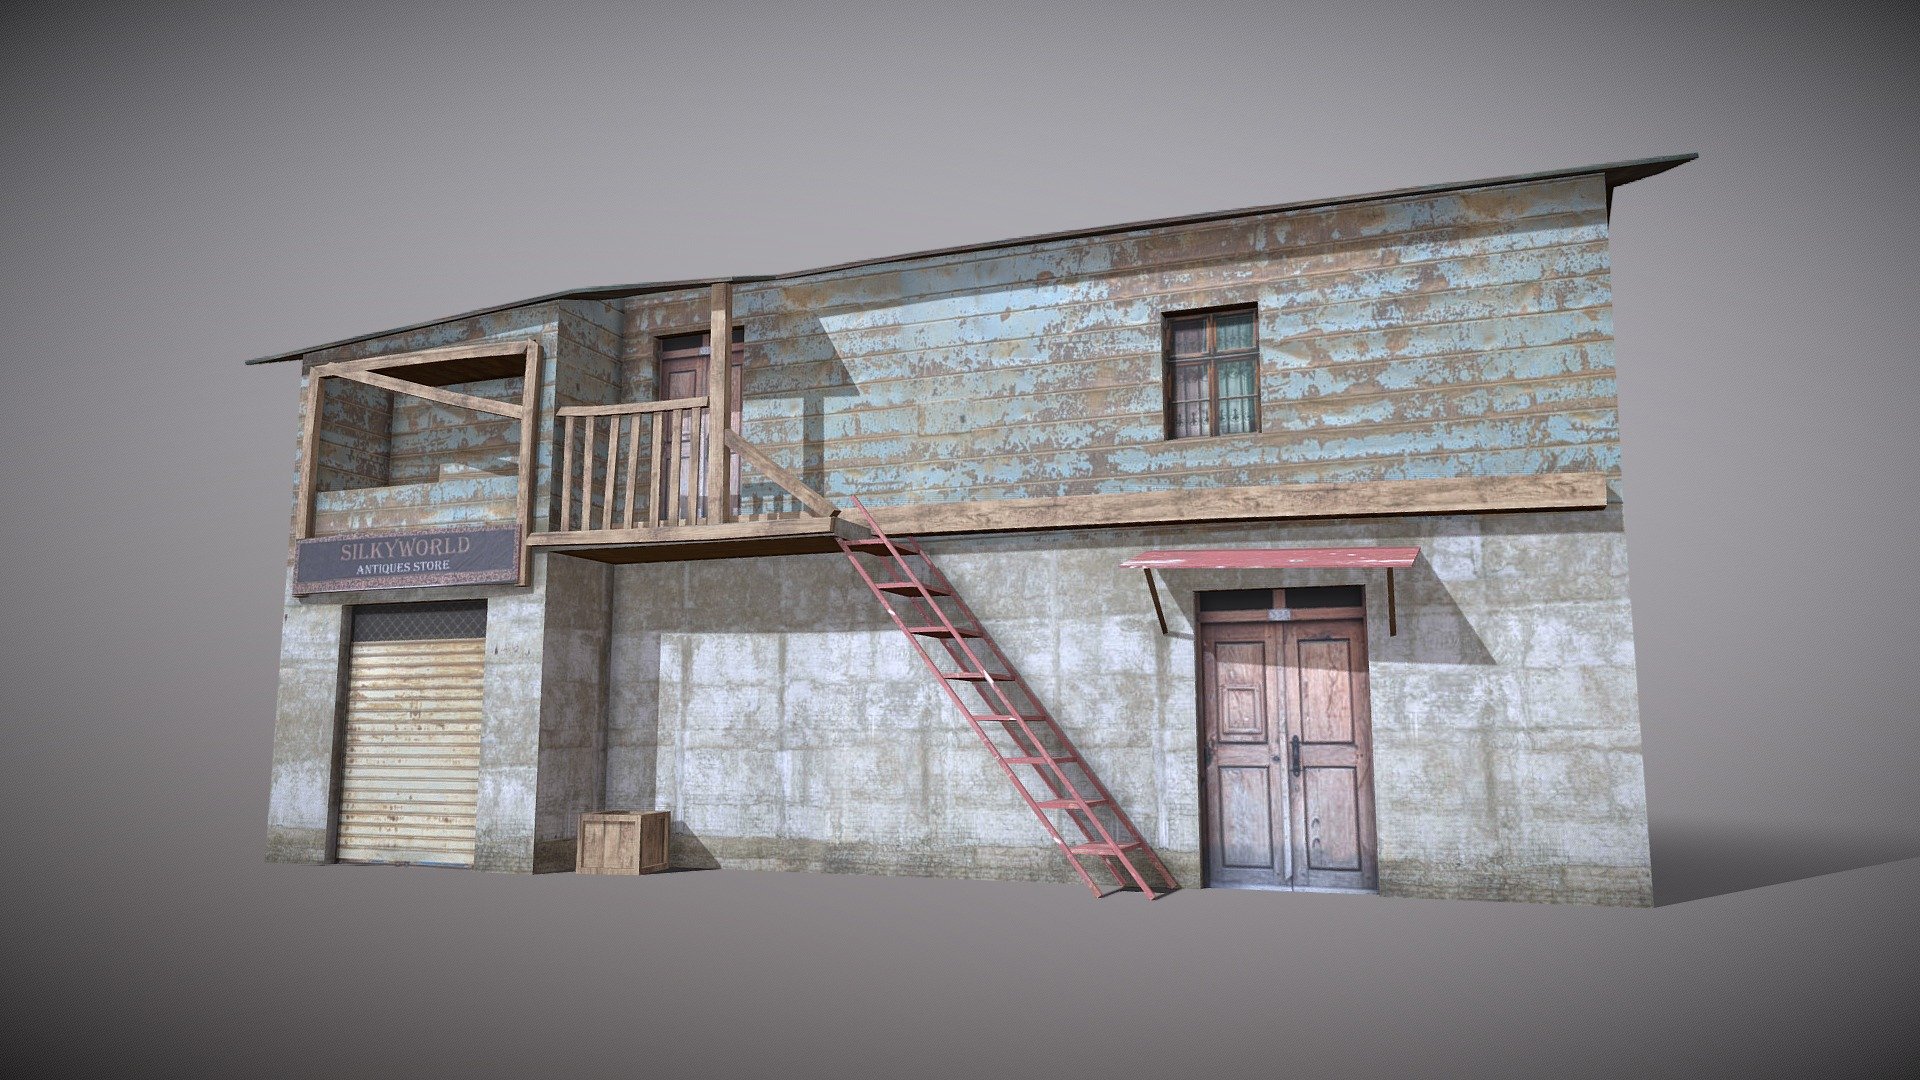 Game Ready 3D Old House /slum Native file format 3Ds max 2022 Other formats Blender 4.0 ,FBX, OBJ, All formats include materials &amp; textures

Polygons- 488   Vertices-572

Materials &amp; textures. 1 Diffuse Map 2048x2048 - Slum X9 - Buy Royalty Free 3D model by 3DRK (@3DRK98) 3d model